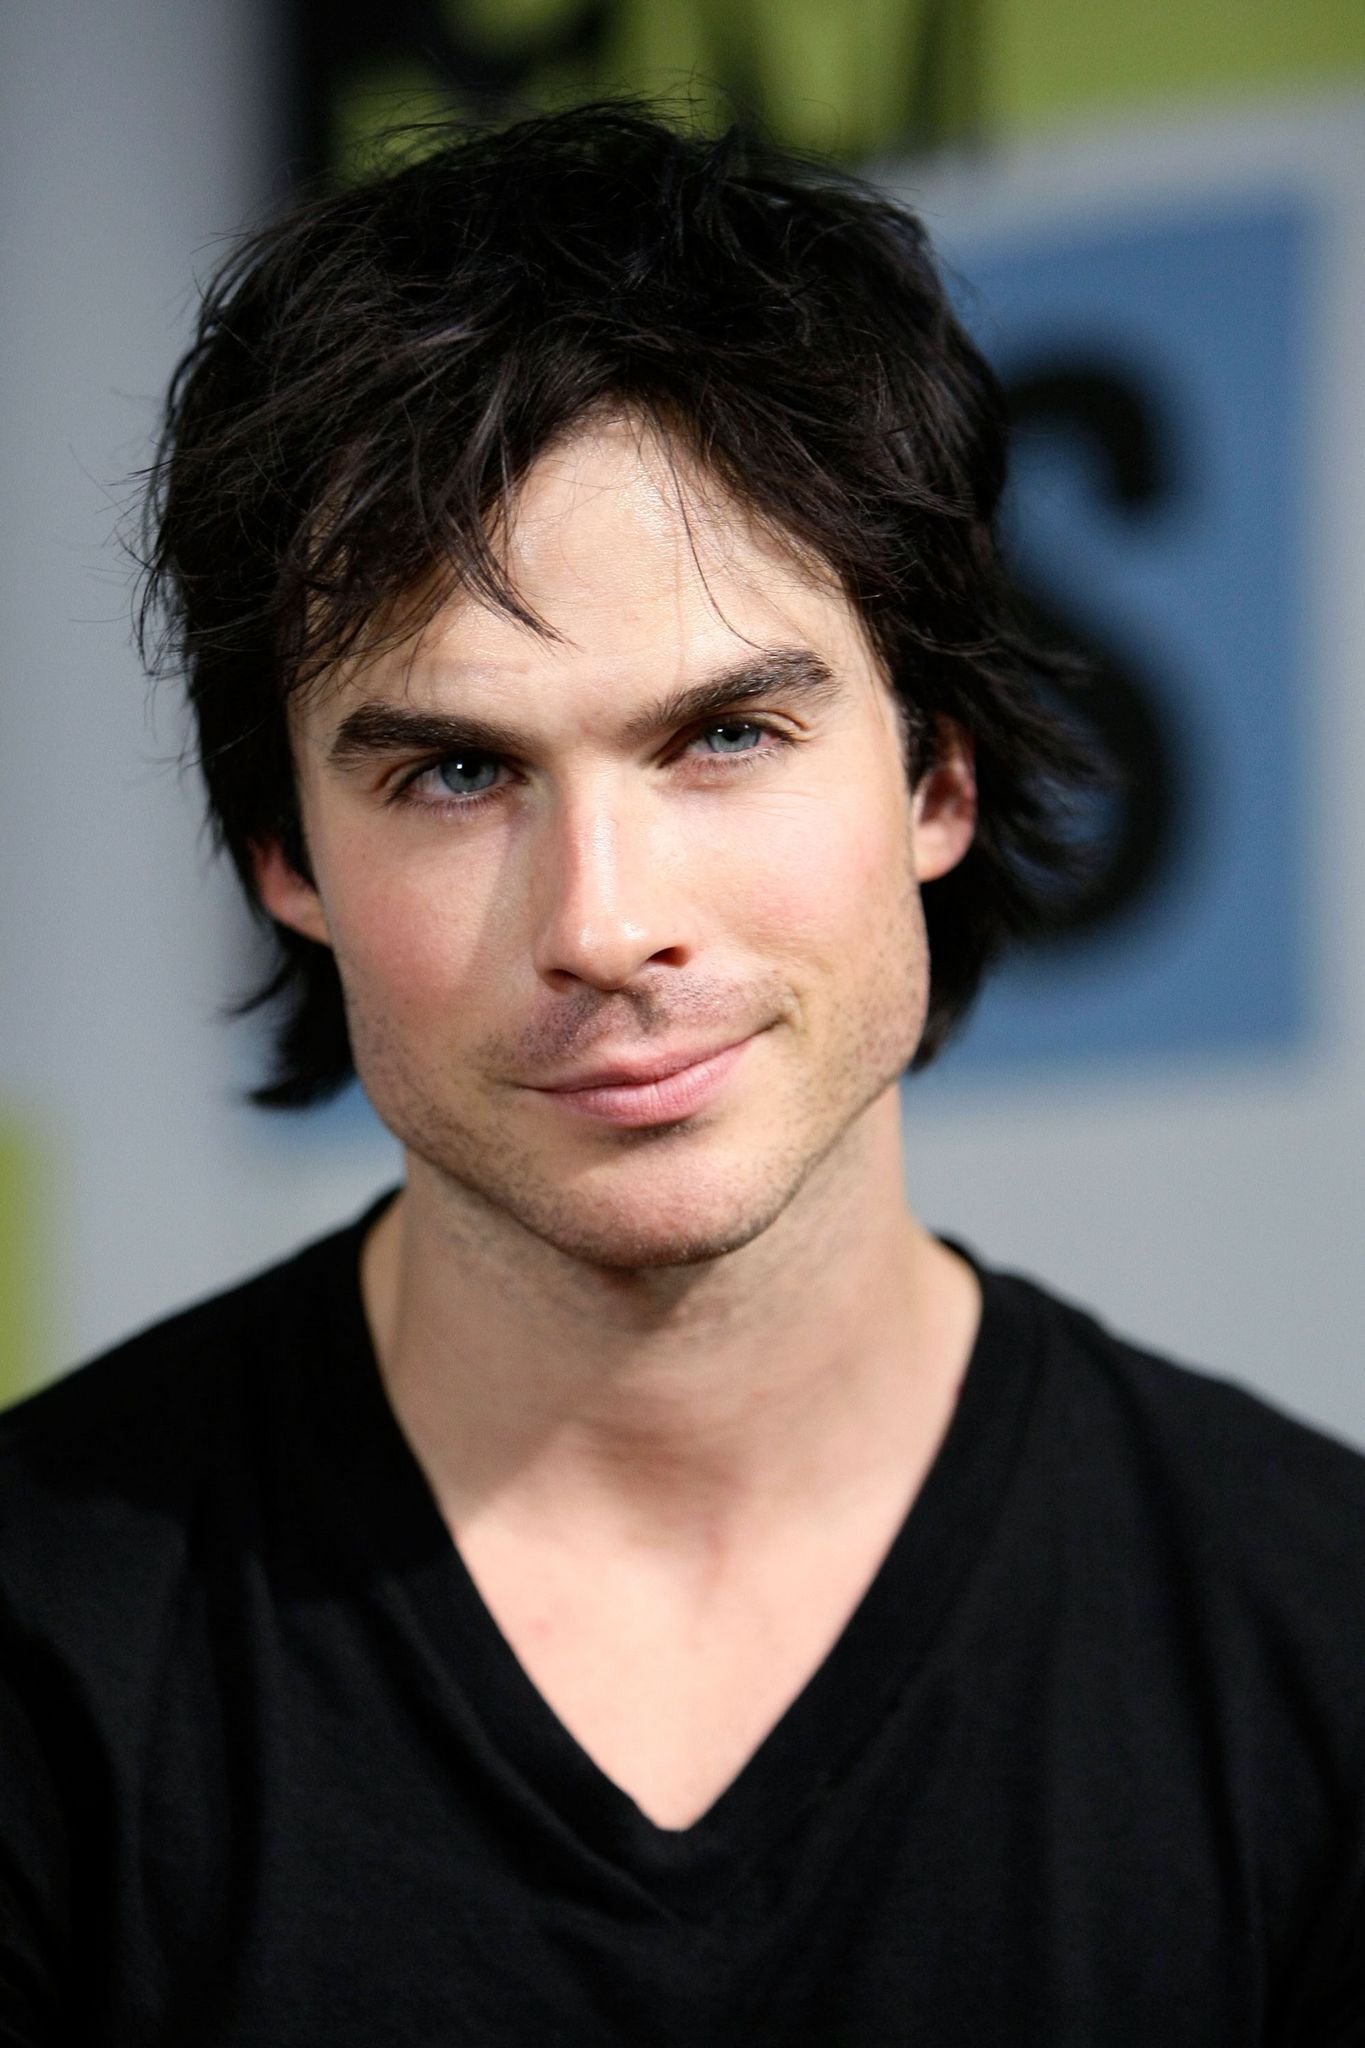 Classify this Anglo hottness, Damon Salvatore